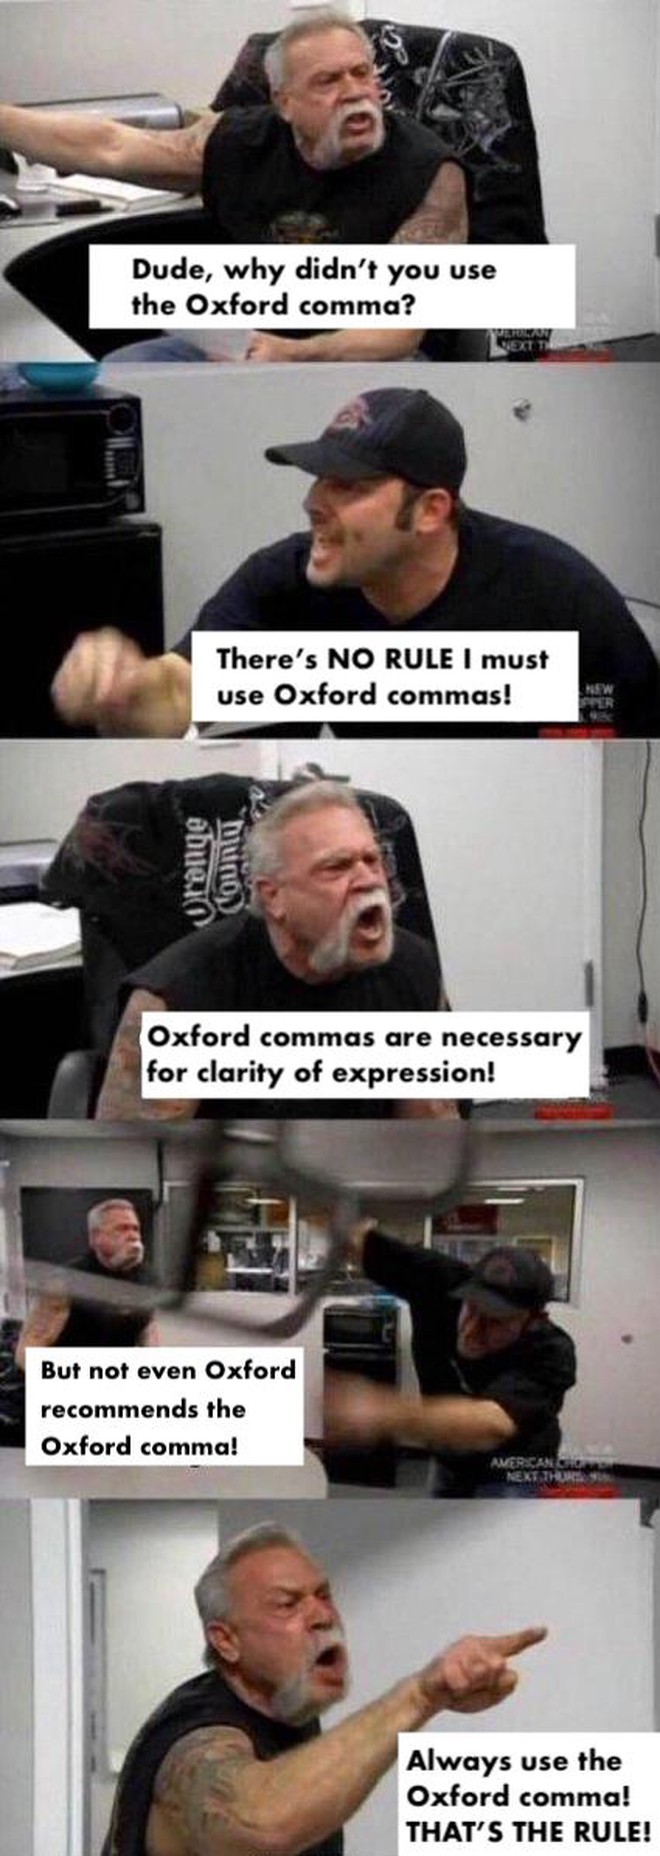 Chopper guys in office yell at each other about the Oxford comma. The older guy ends it saying ‘Always use the Oxford Comma! That’s the rule!’